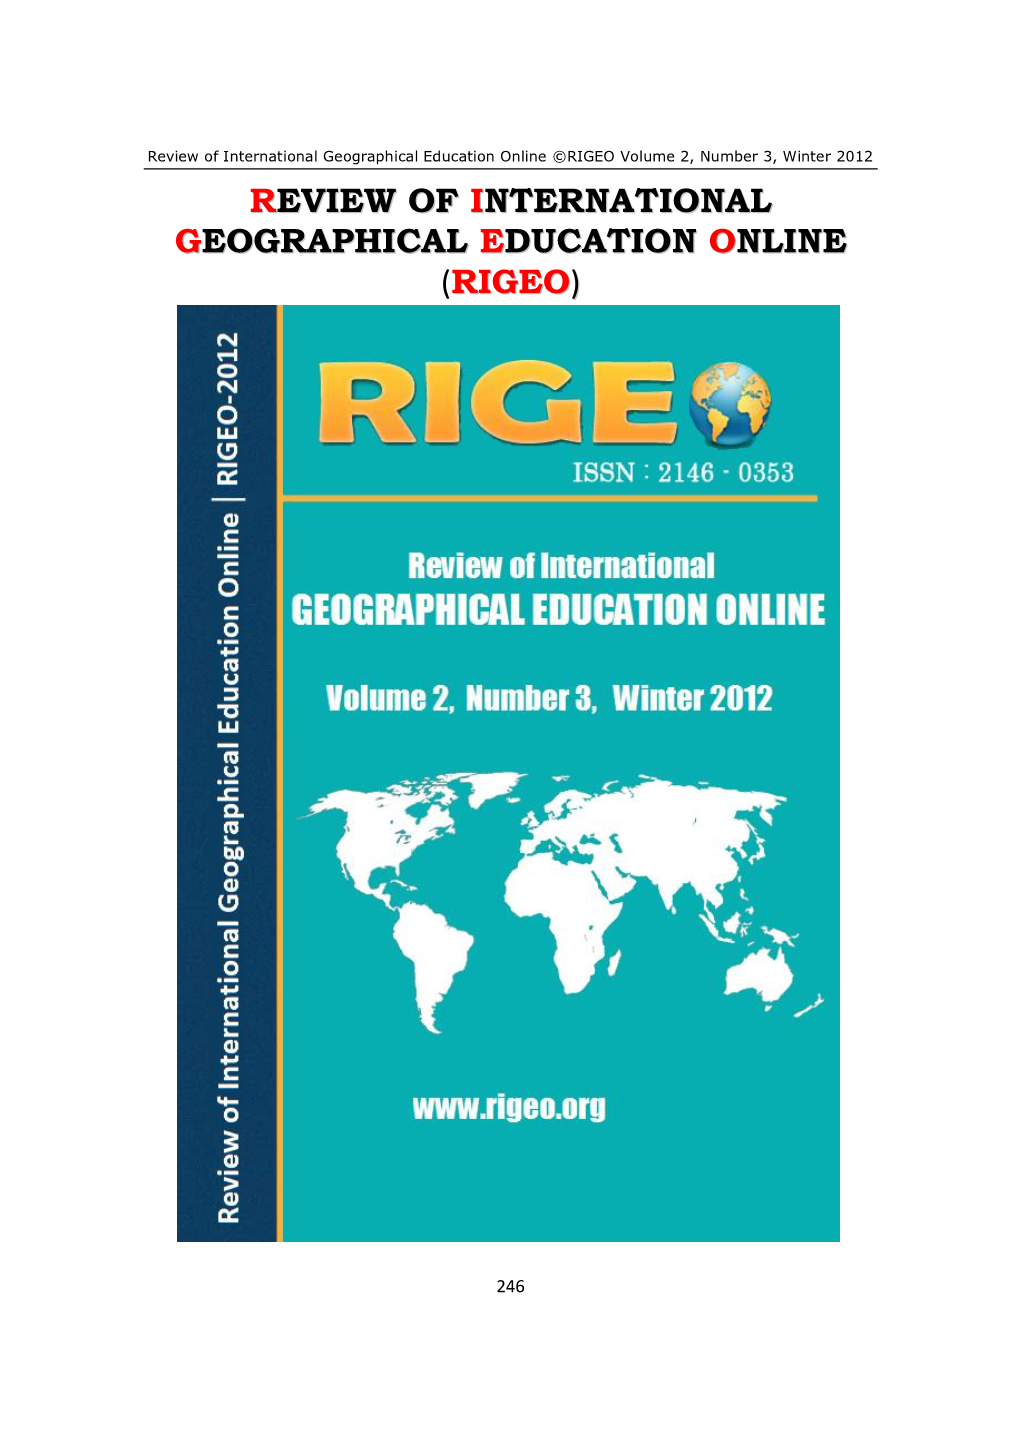 Review of International Geographical Education Online ©RIGEO Volume 2, Number 3, Winter 2012 REVIEW of INTERNATIONAL GEOGRAPHICAL EDUCATION ONLINE (RIGEO)